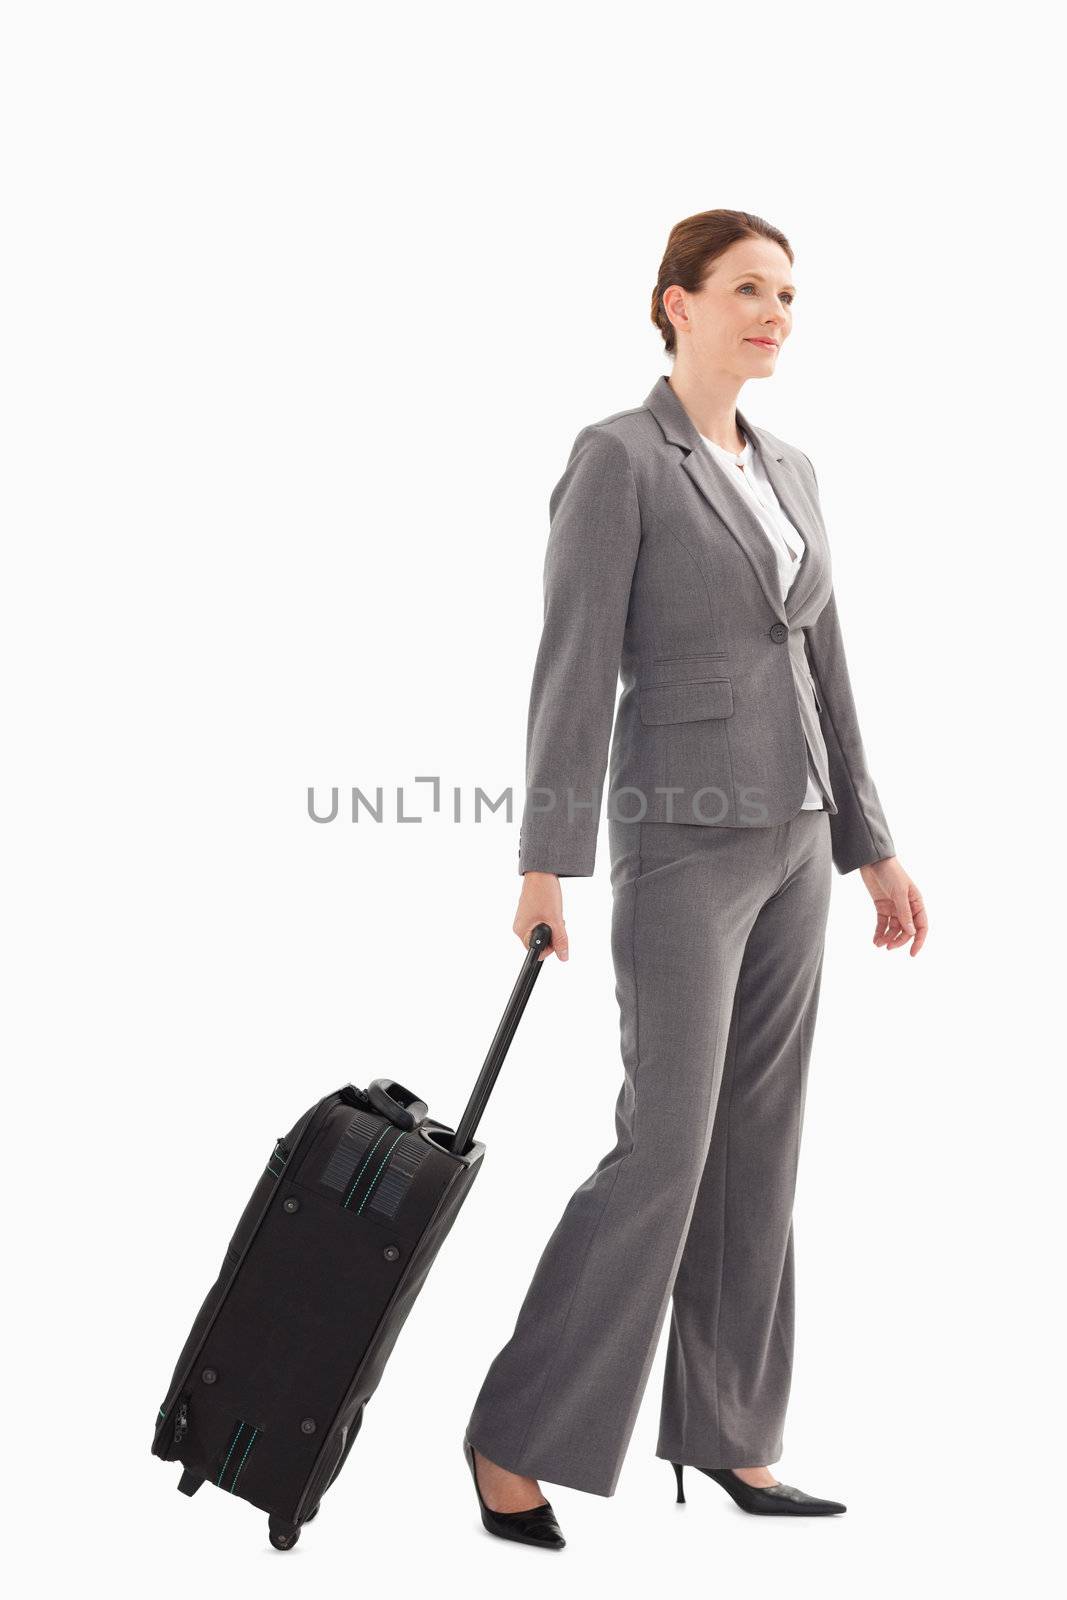 Smiling businesswoman with suitcase walking by Wavebreakmedia